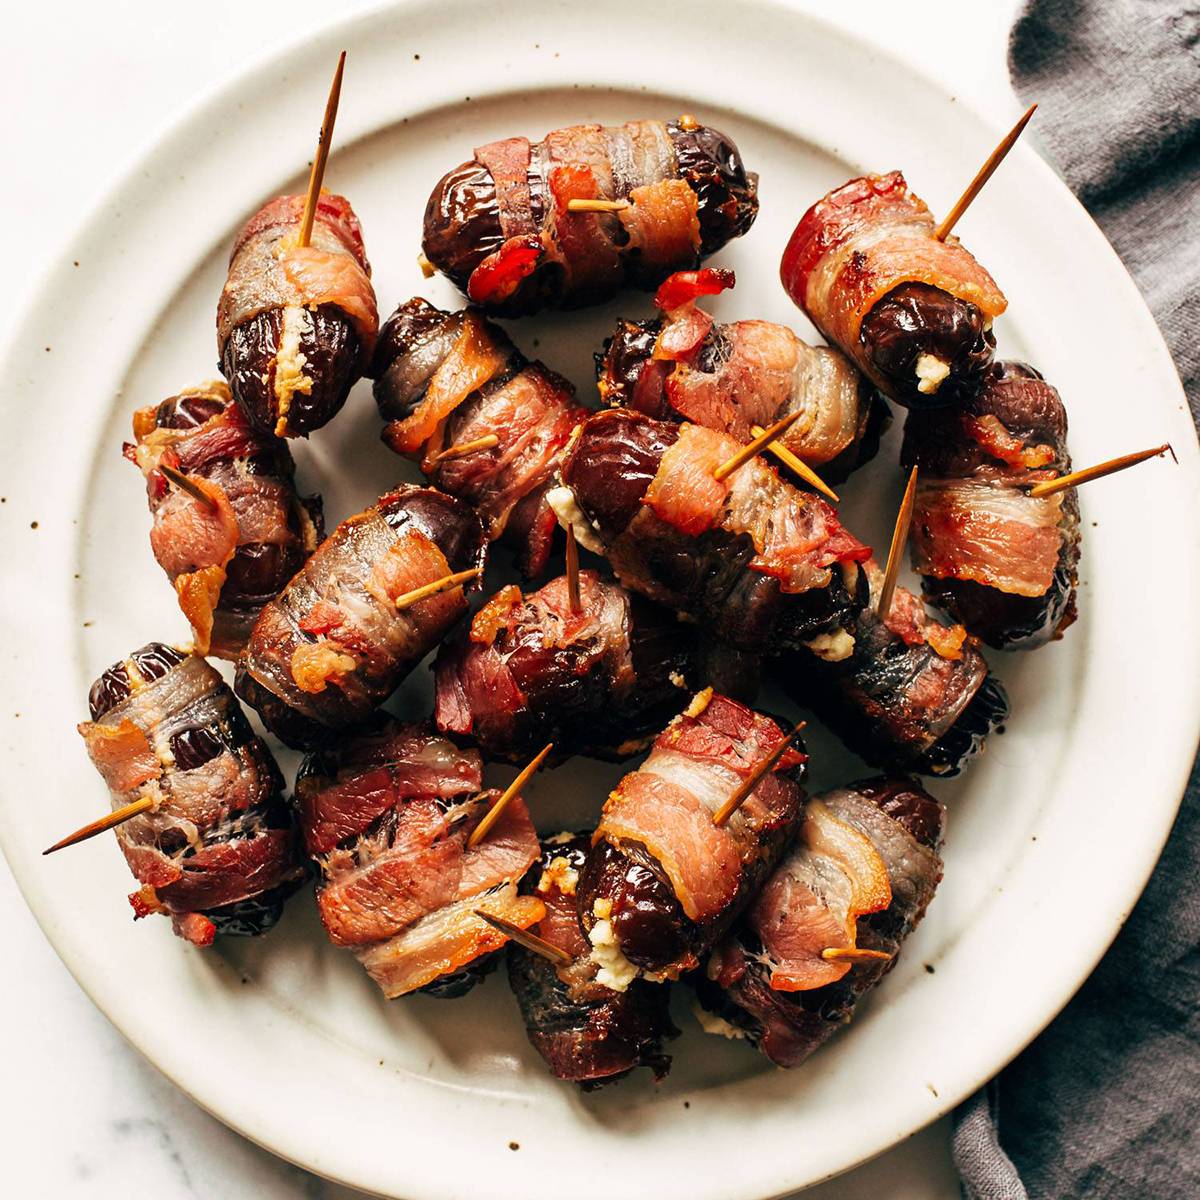 Bacon-wrapped dates on a plate